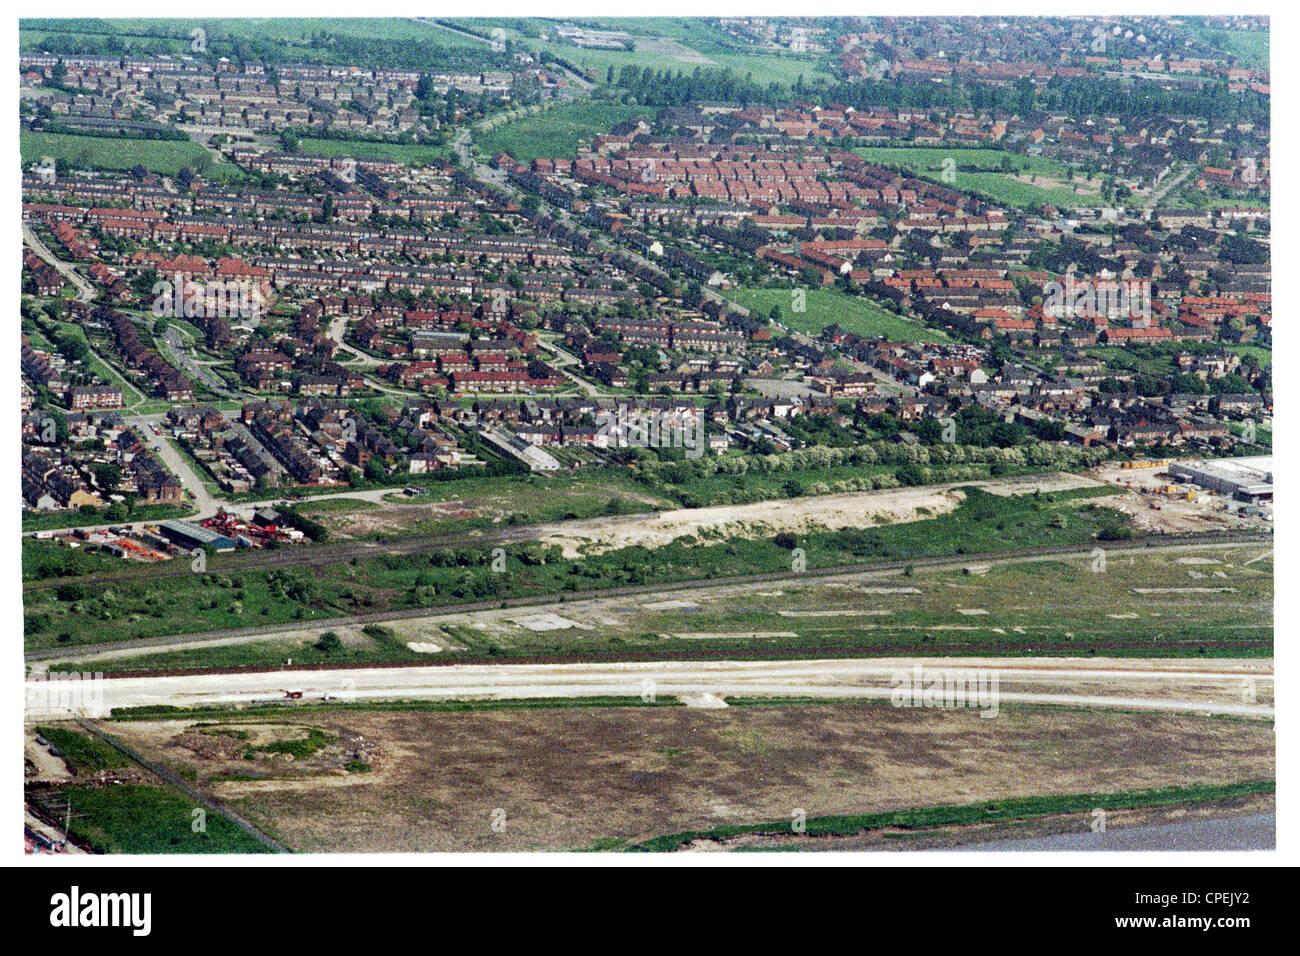 area of hessle west of hull now developed completely. The A63 road is being rebuilt to form the new clive sullivan way Stock Photo